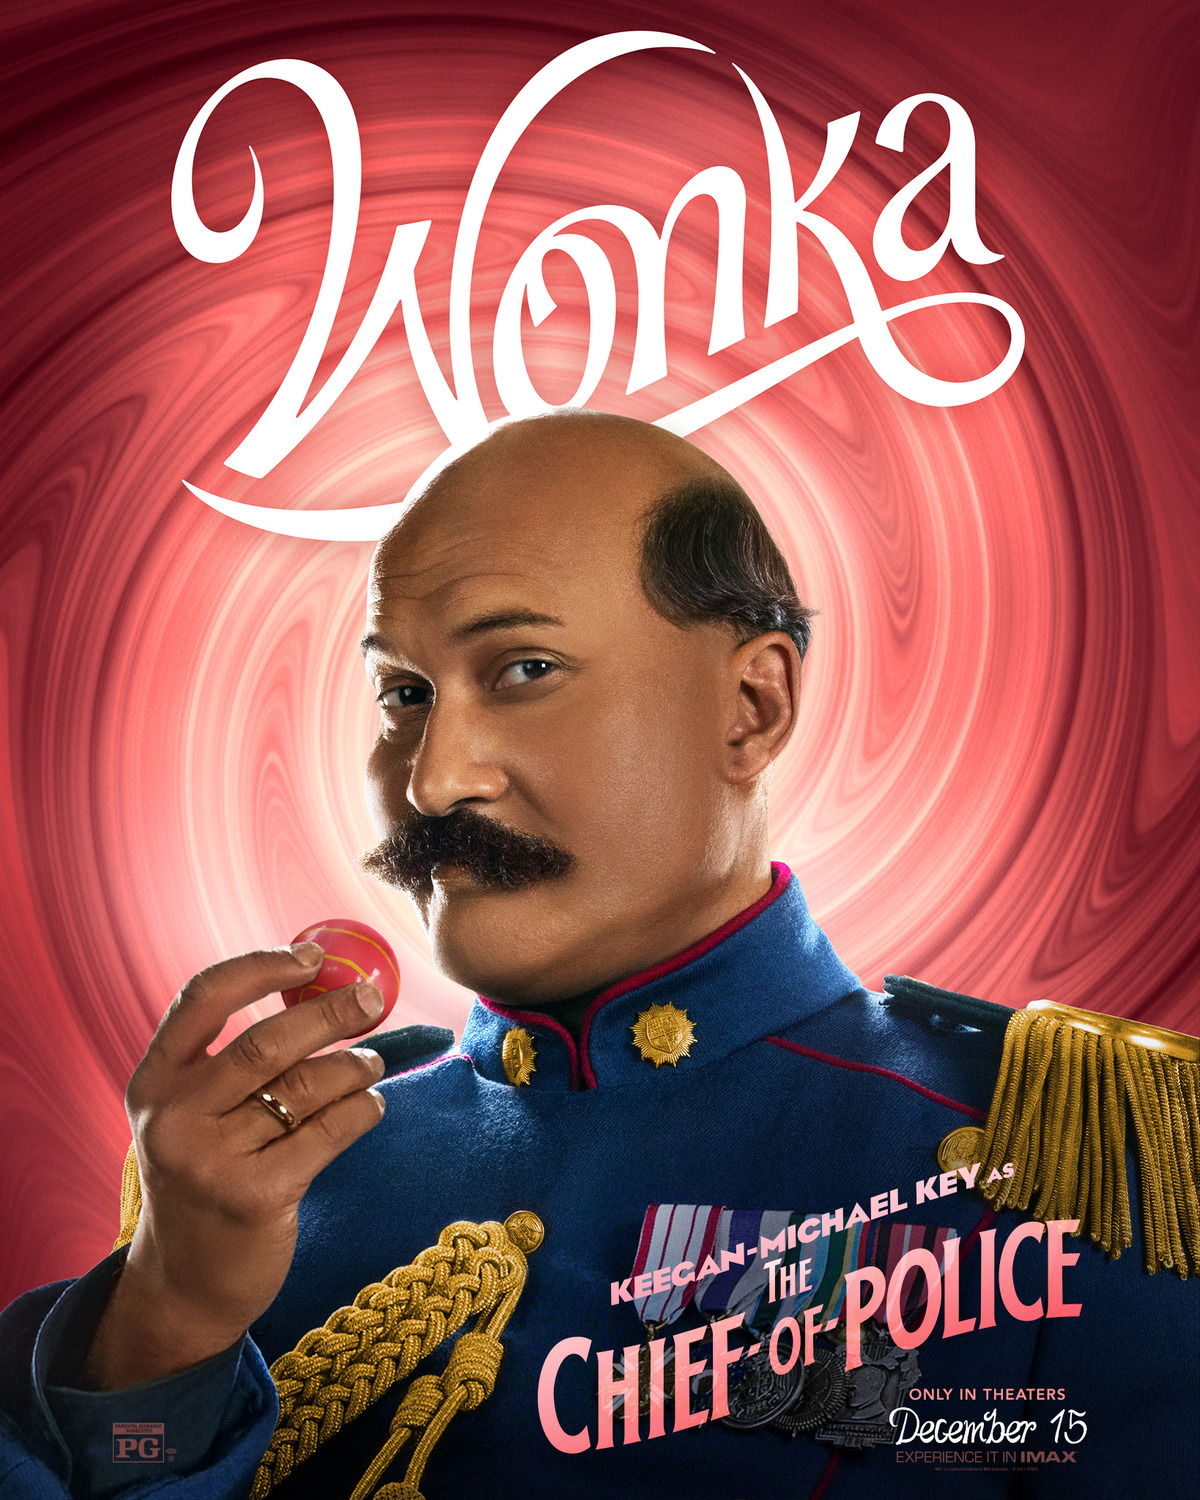 Extra Large Movie Poster Image for Wonka (#10 of 22)